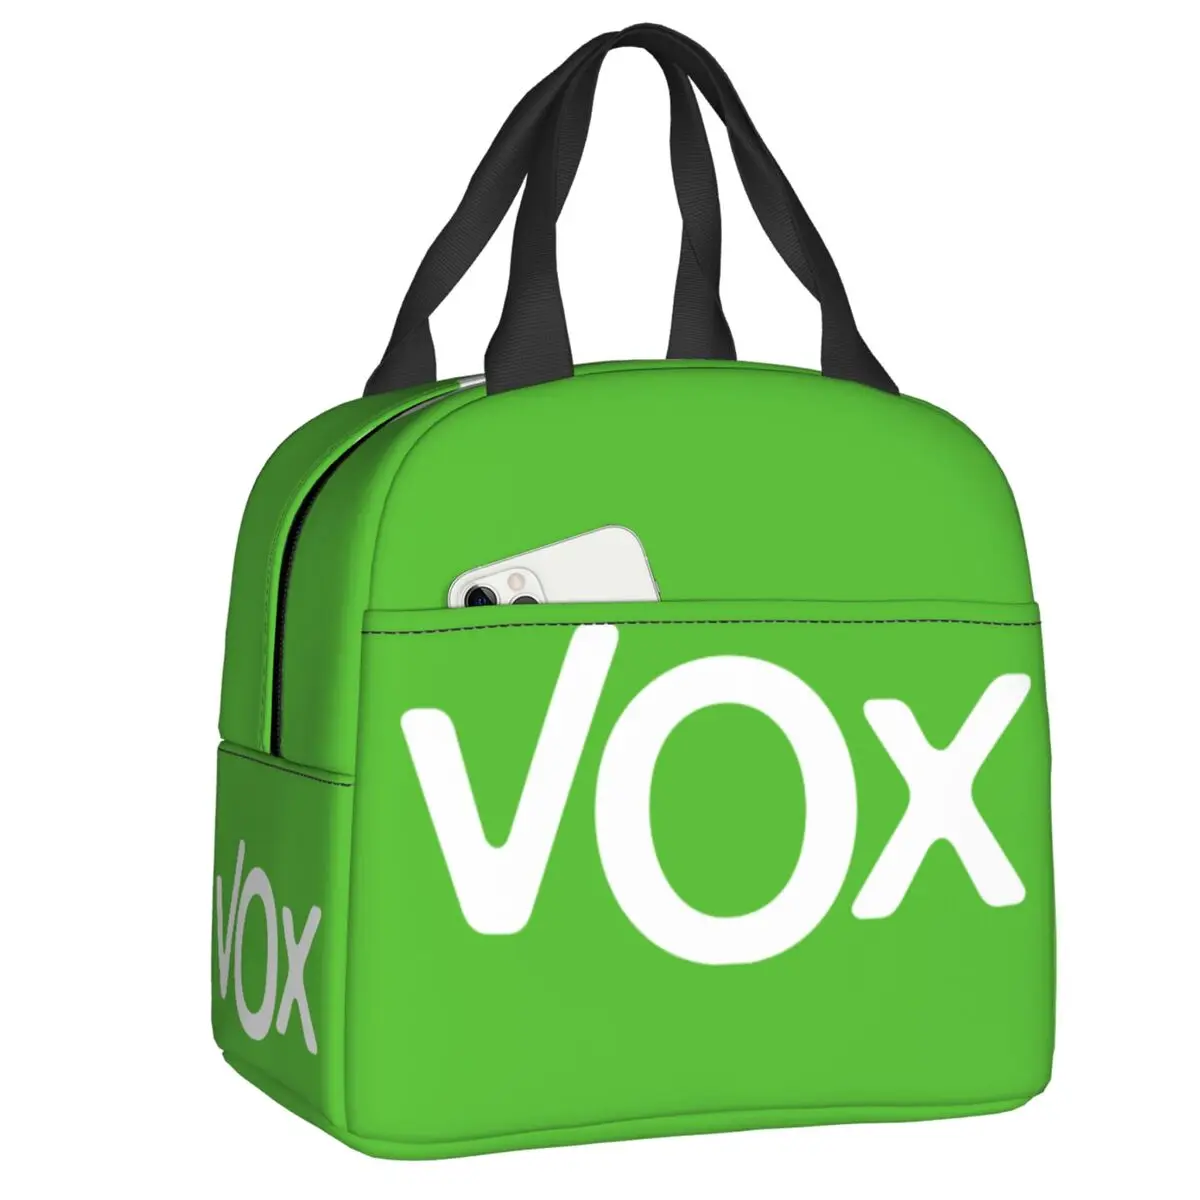 

Spain Vox Flag Insulated Lunch Bag Spanish Political Party Portable Thermal Cooler Bento Box For Women Kids Food Picnic Bags